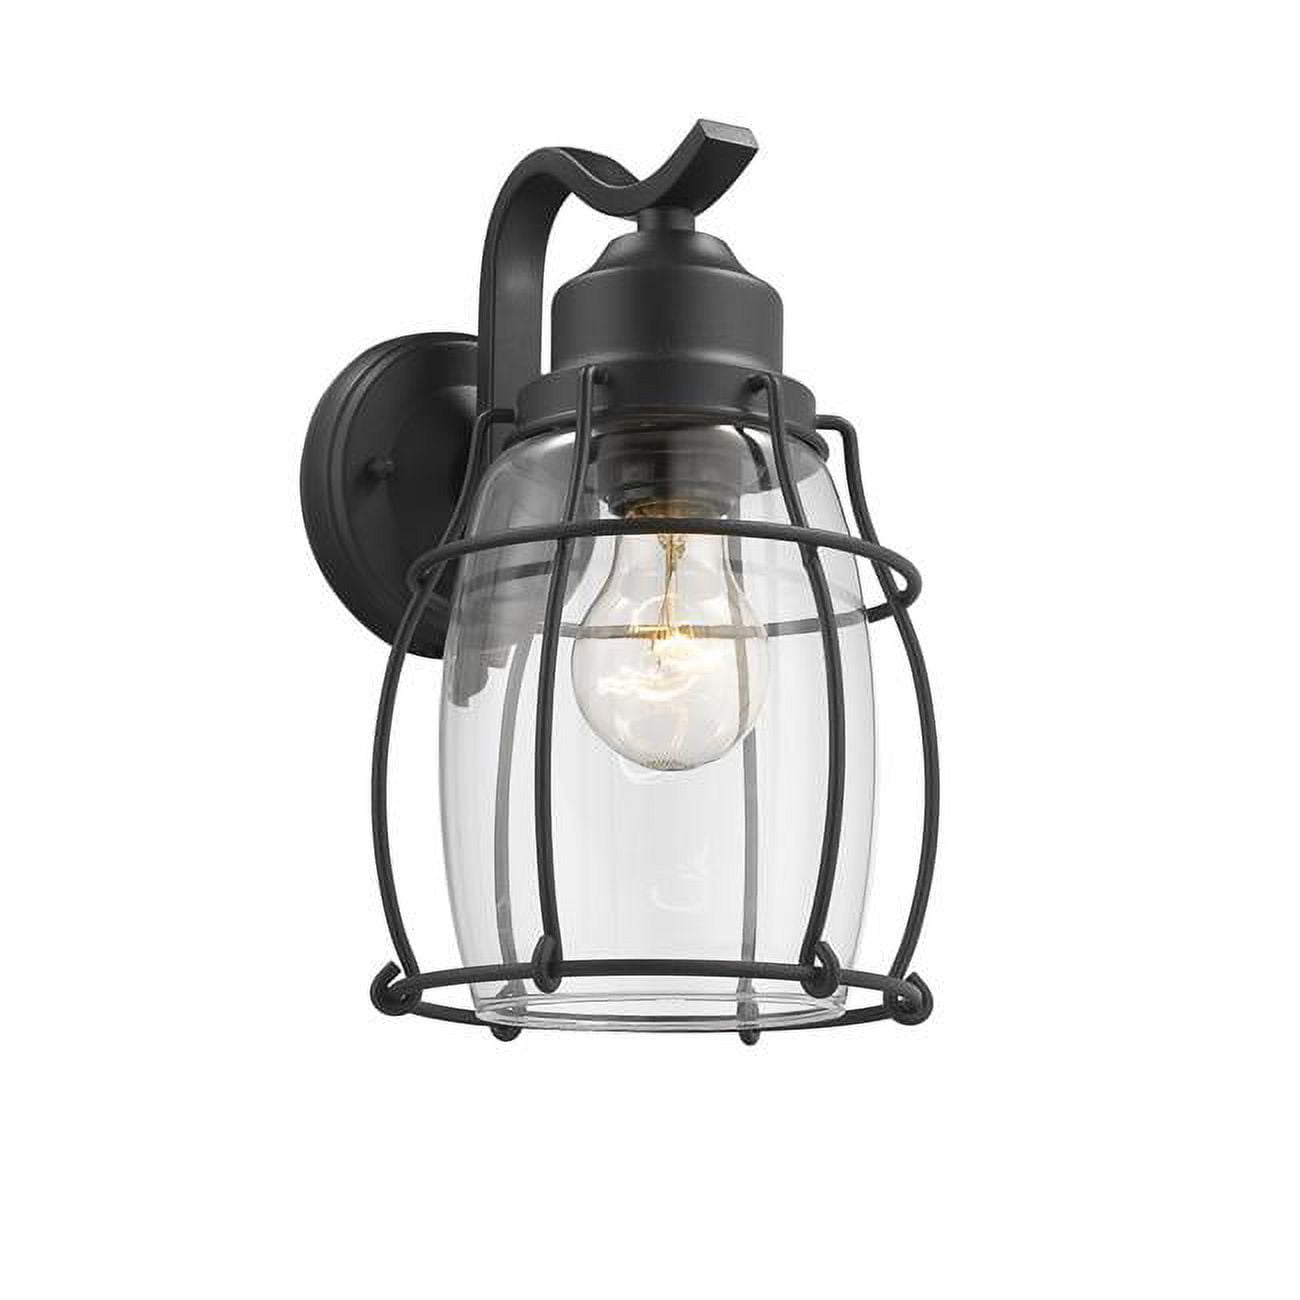 Ch2d291bk11-od1 Charlotte Industrial 1 Light Textured Black Outdoor Wall Sconce - 11 In.